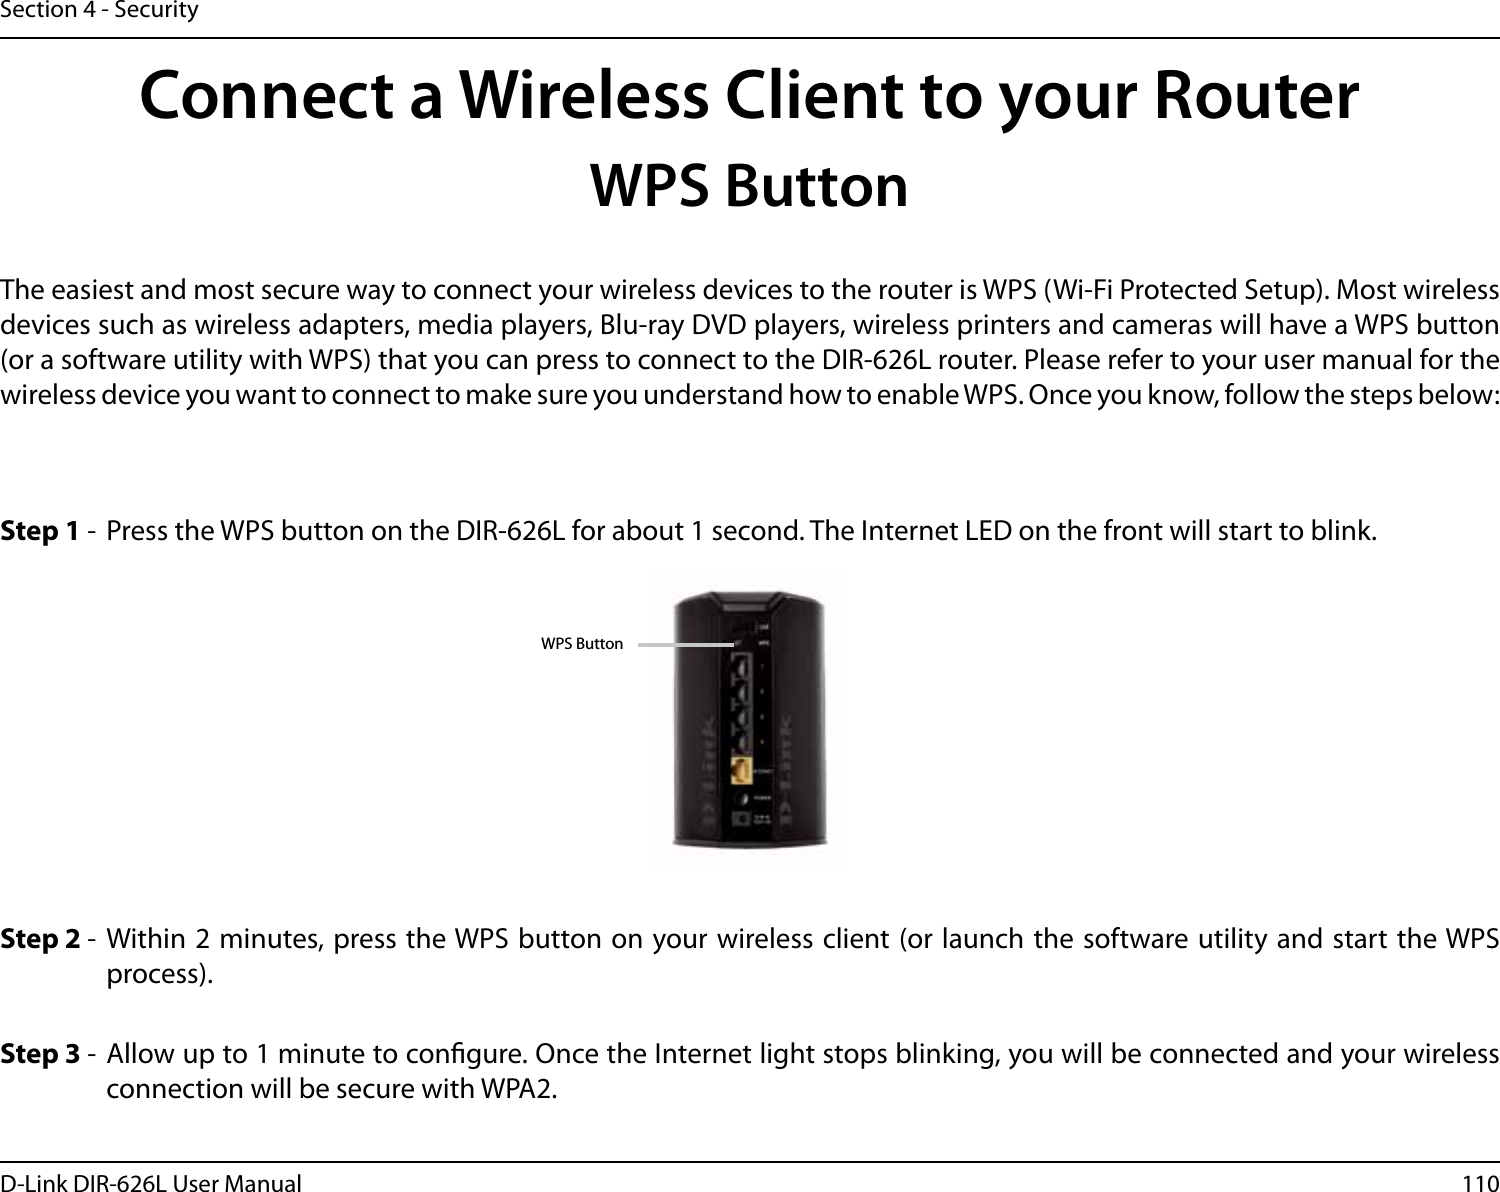 110D-Link DIR-626L User ManualSection 4 - SecurityConnect a Wireless Client to your RouterWPS ButtonStep 2 -  Within 2 minutes, press the WPS button on your wireless client (or launch the software utility and start the WPS process).The easiest and most secure way to connect your wireless devices to the router is WPS (Wi-Fi Protected Setup). Most wireless devices such as wireless adapters, media players, Blu-ray DVD players, wireless printers and cameras will have a WPS button (or a software utility with WPS) that you can press to connect to the DIR-626L router. Please refer to your user manual for the wireless device you want to connect to make sure you understand how to enable WPS. Once you know, follow the steps below:Step 1 -  Press the WPS button on the DIR-626L for about 1 second. The Internet LED on the front will start to blink.Step 3 -  Allow up to 1 minute to congure. Once the Internet light stops blinking, you will be connected and your wireless connection will be secure with WPA2.WPS Button